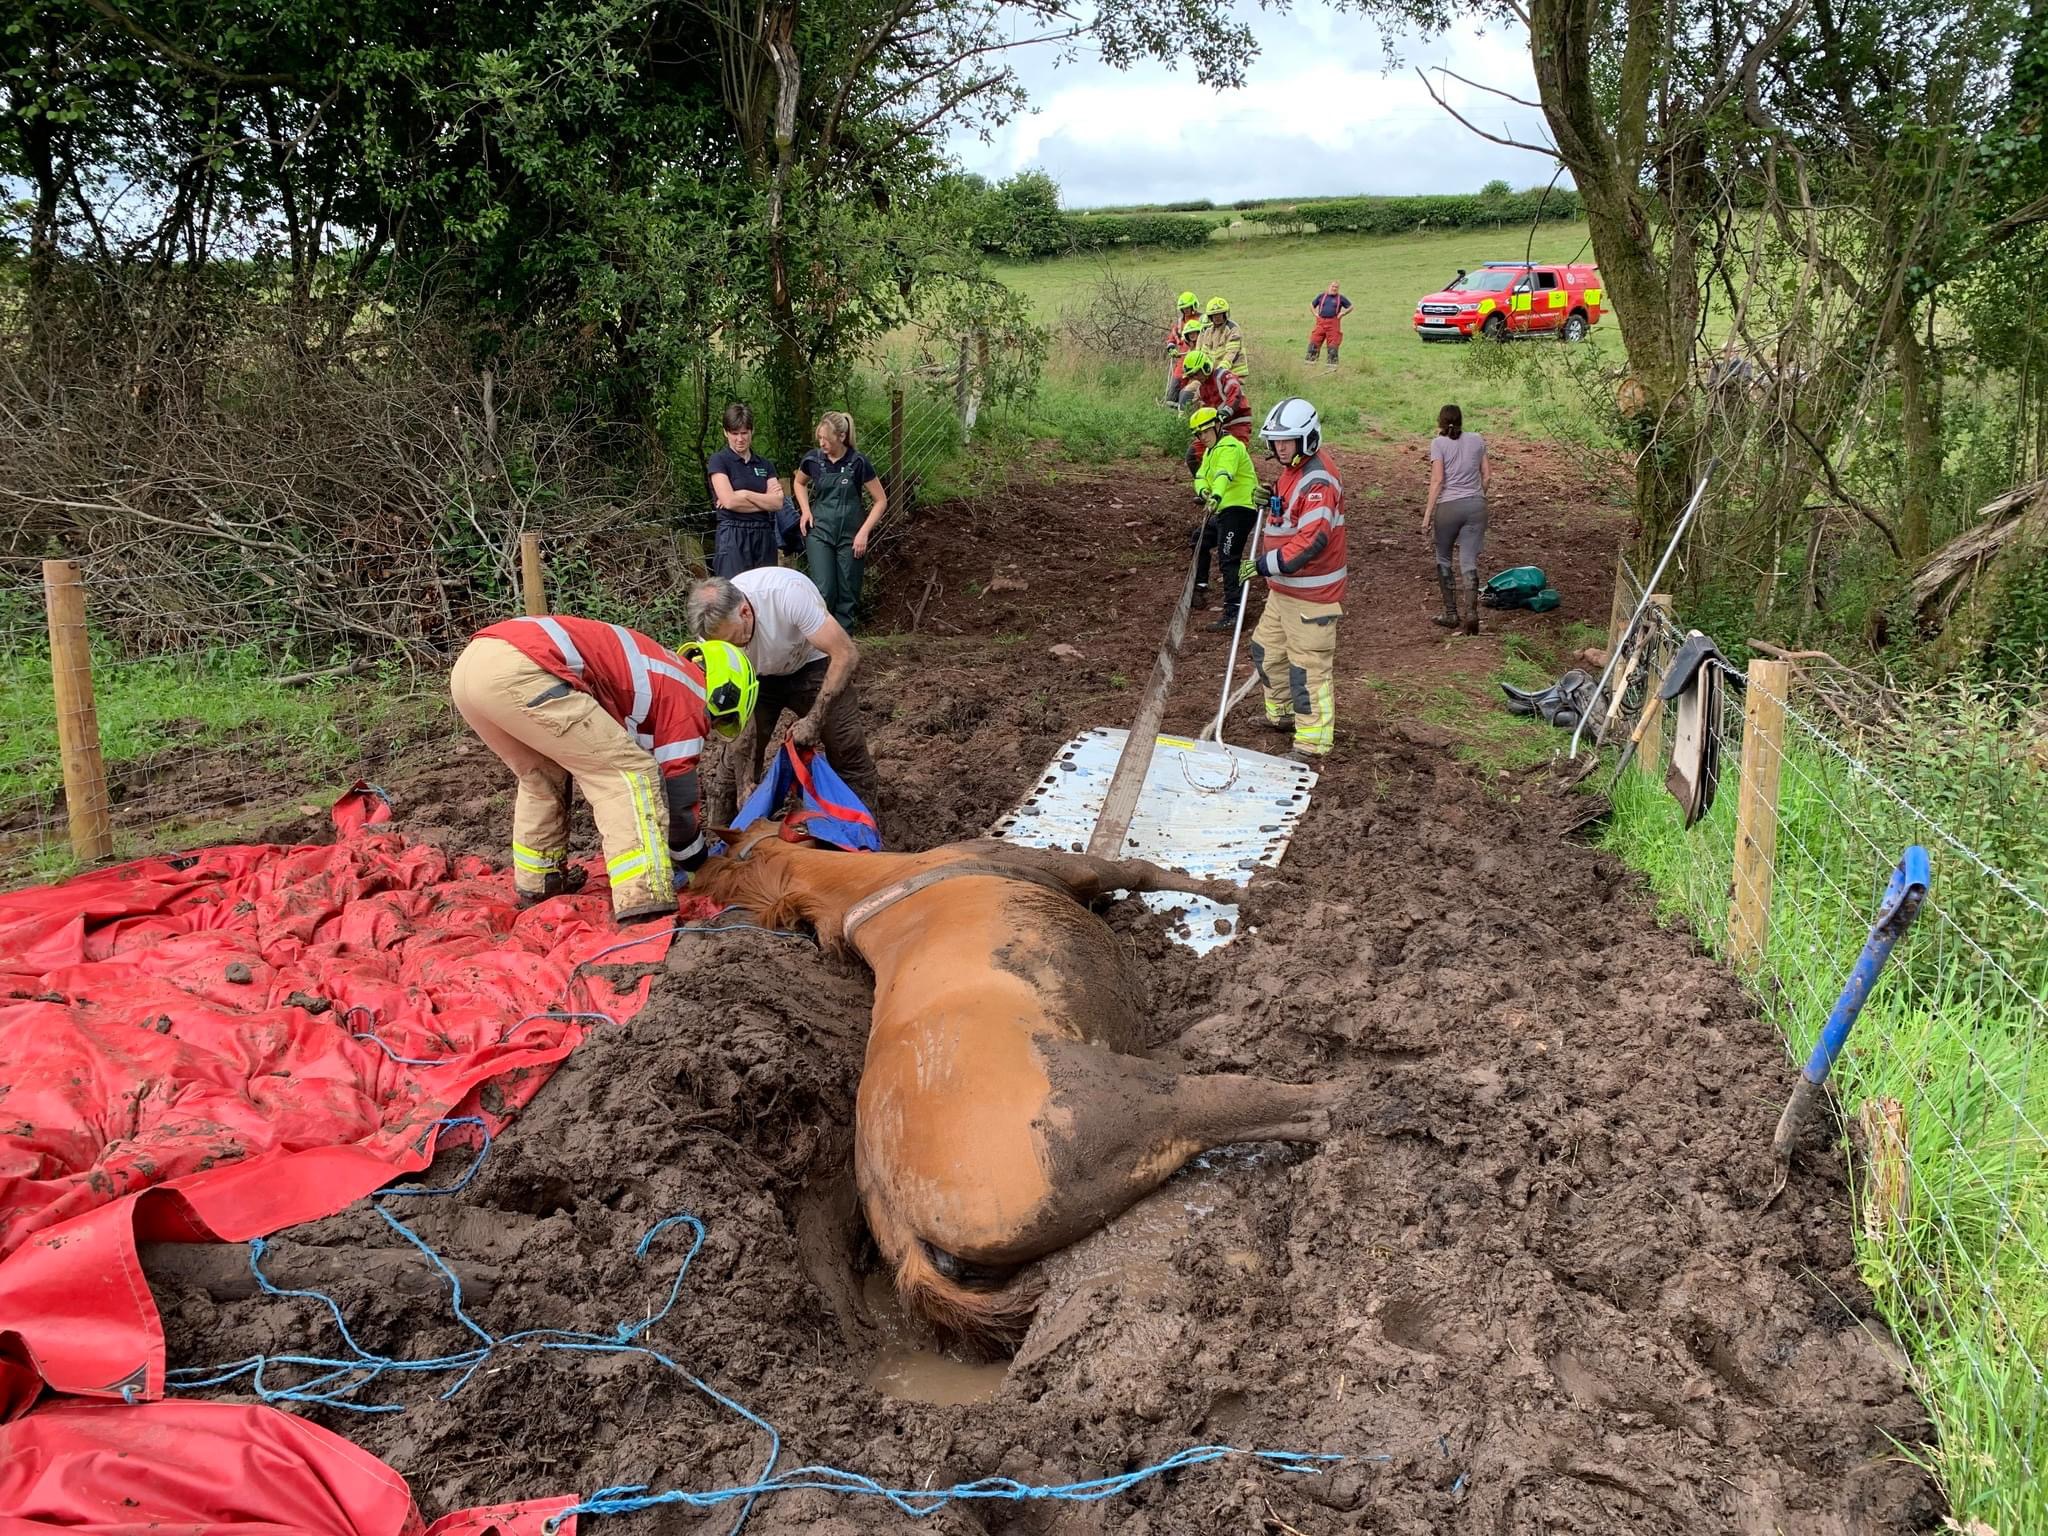 NEWS | Fire and Rescue Service crew help rescue a 20-year-old horse that was stuck in deep mud